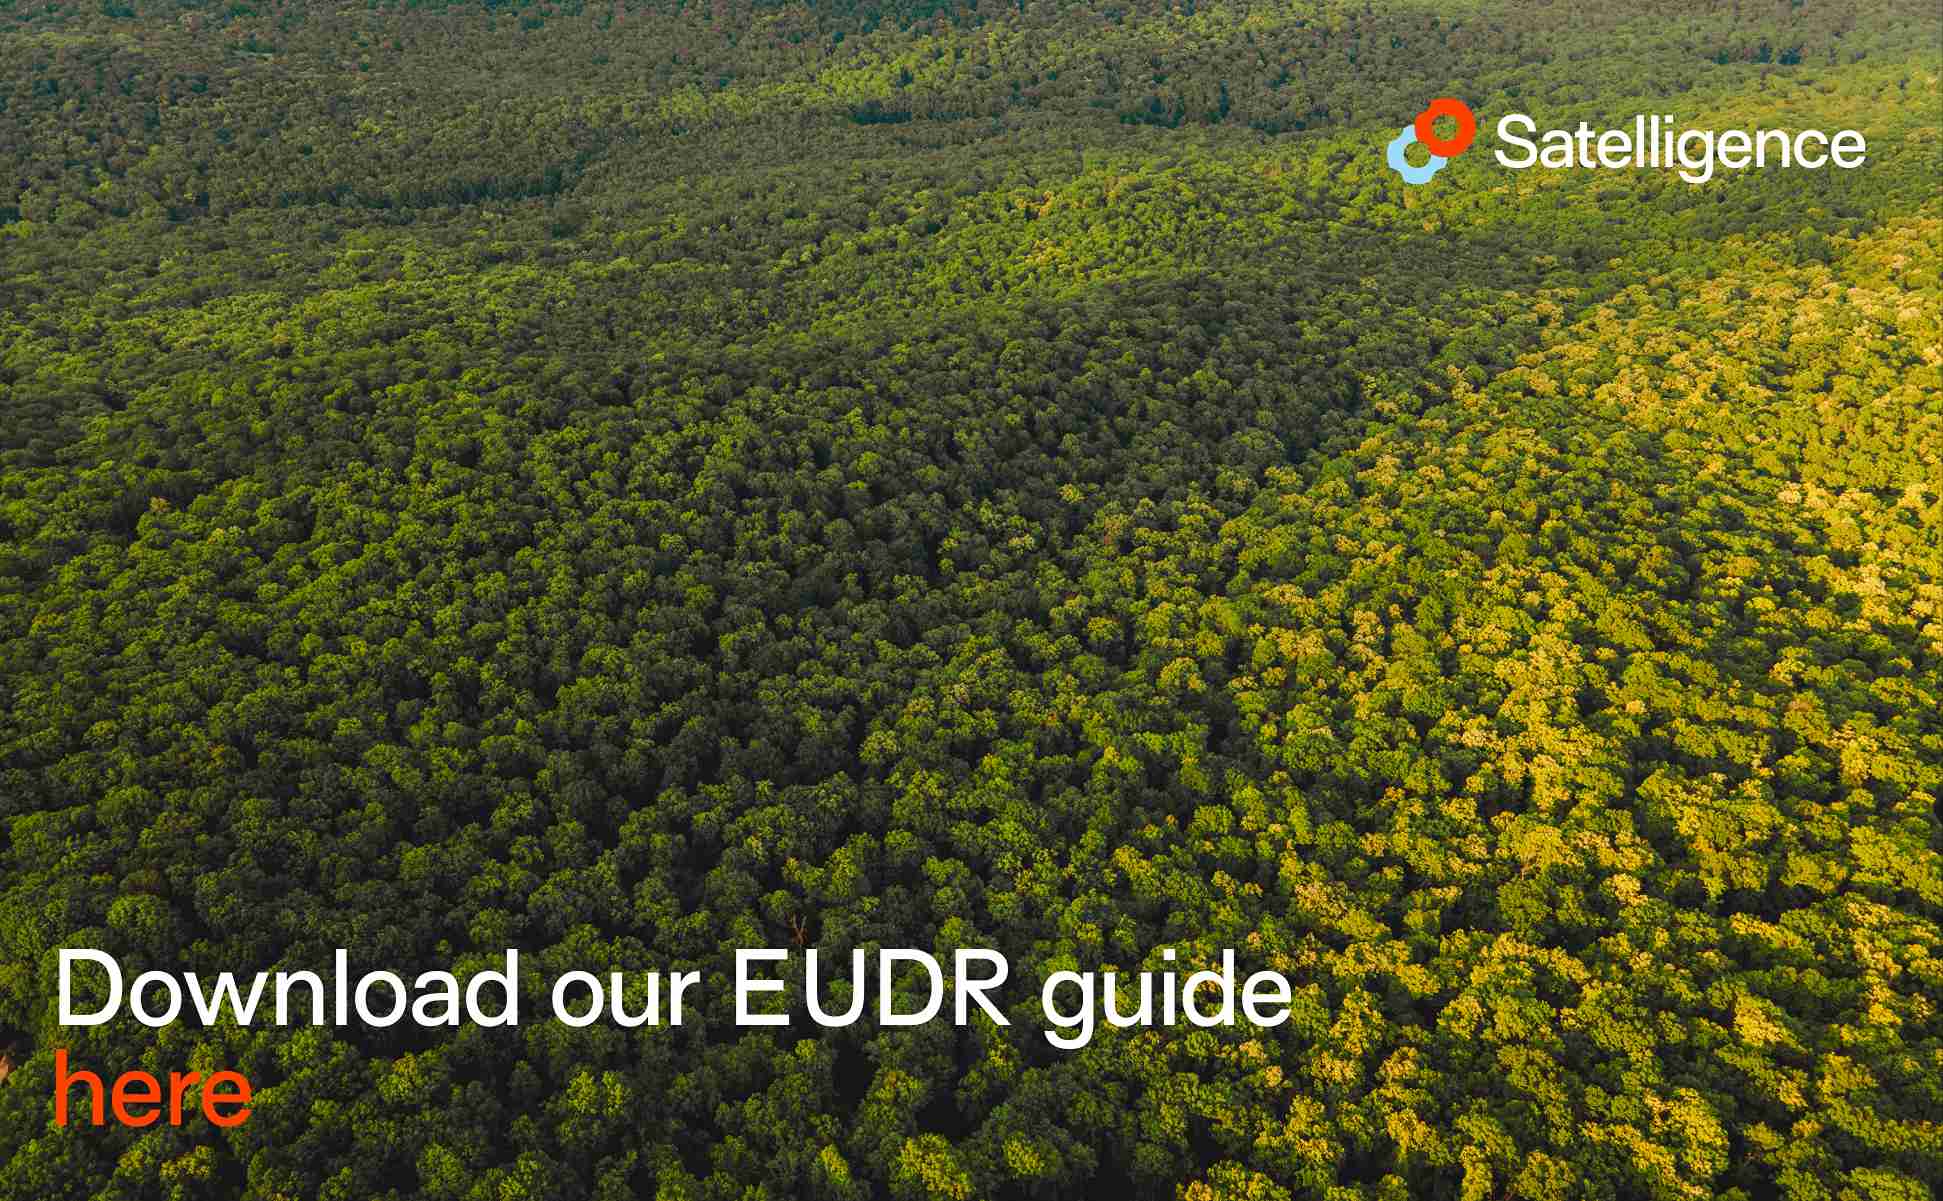 Satelligence EUDR Guide: A comprehensive tool for understanding and navigating the regulation on deforestation-free products